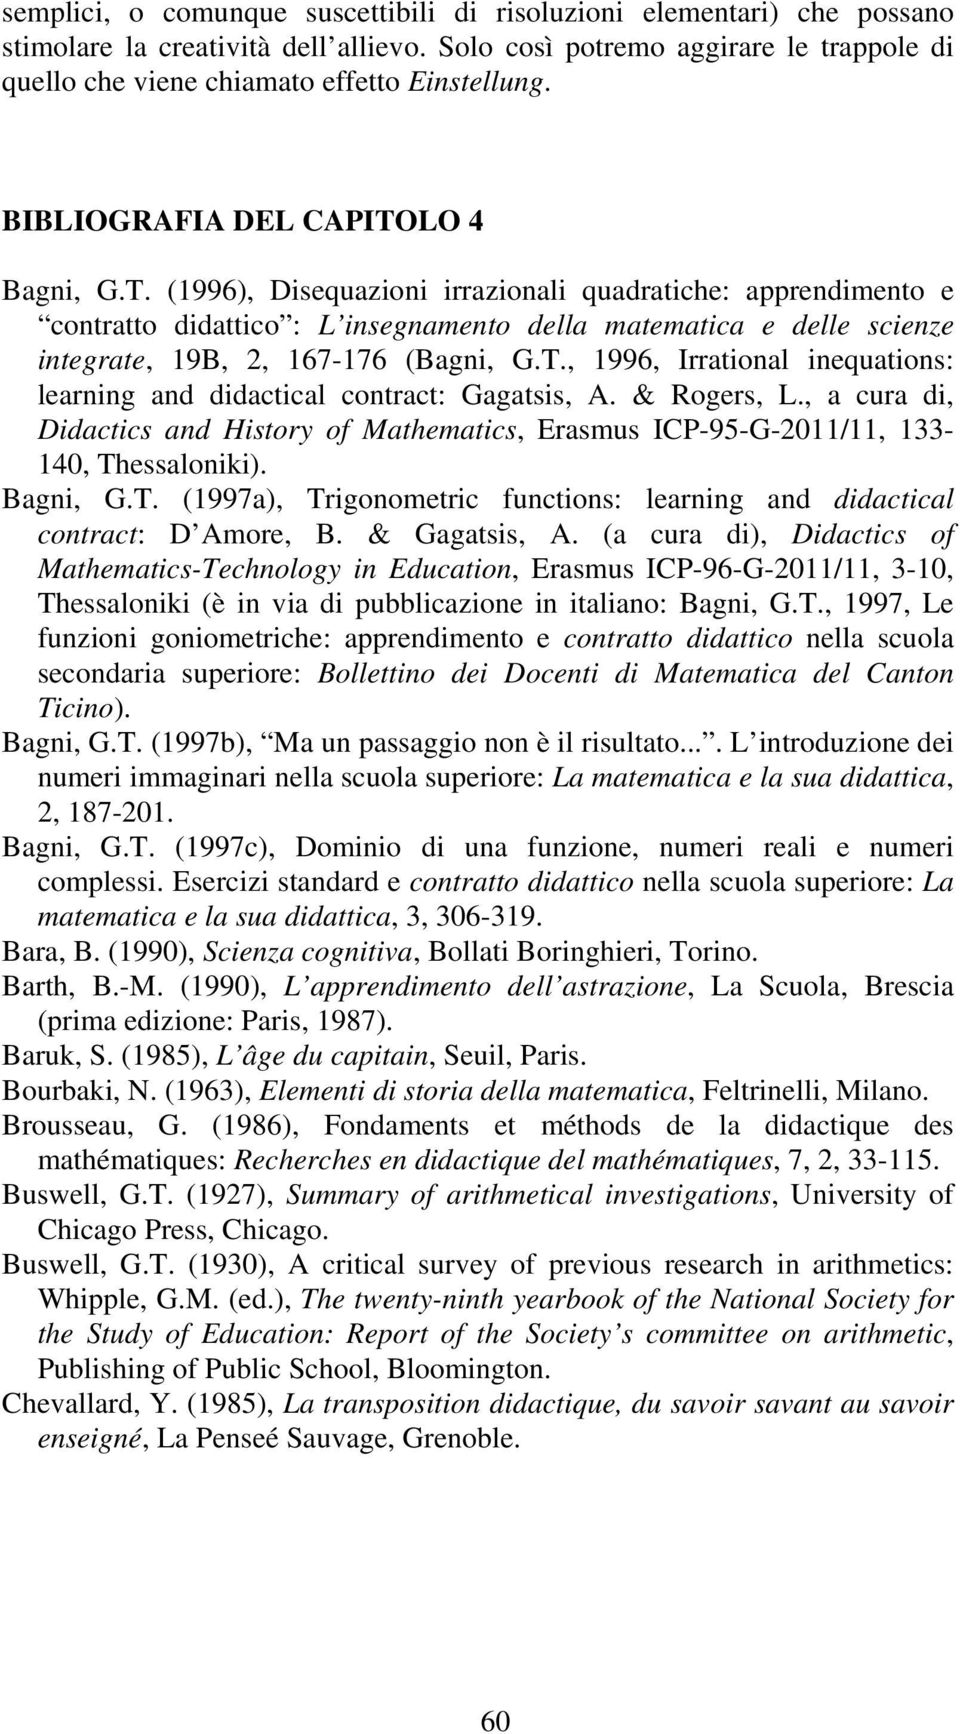 T., 1996, Irrational inequations: learning and didactical contract: Gagatsis, A. & Rogers, L., a cura di, Didactics and History of Mathematics, Erasmus ICP-95-G-2011/11, 133-140, Thessaloniki).